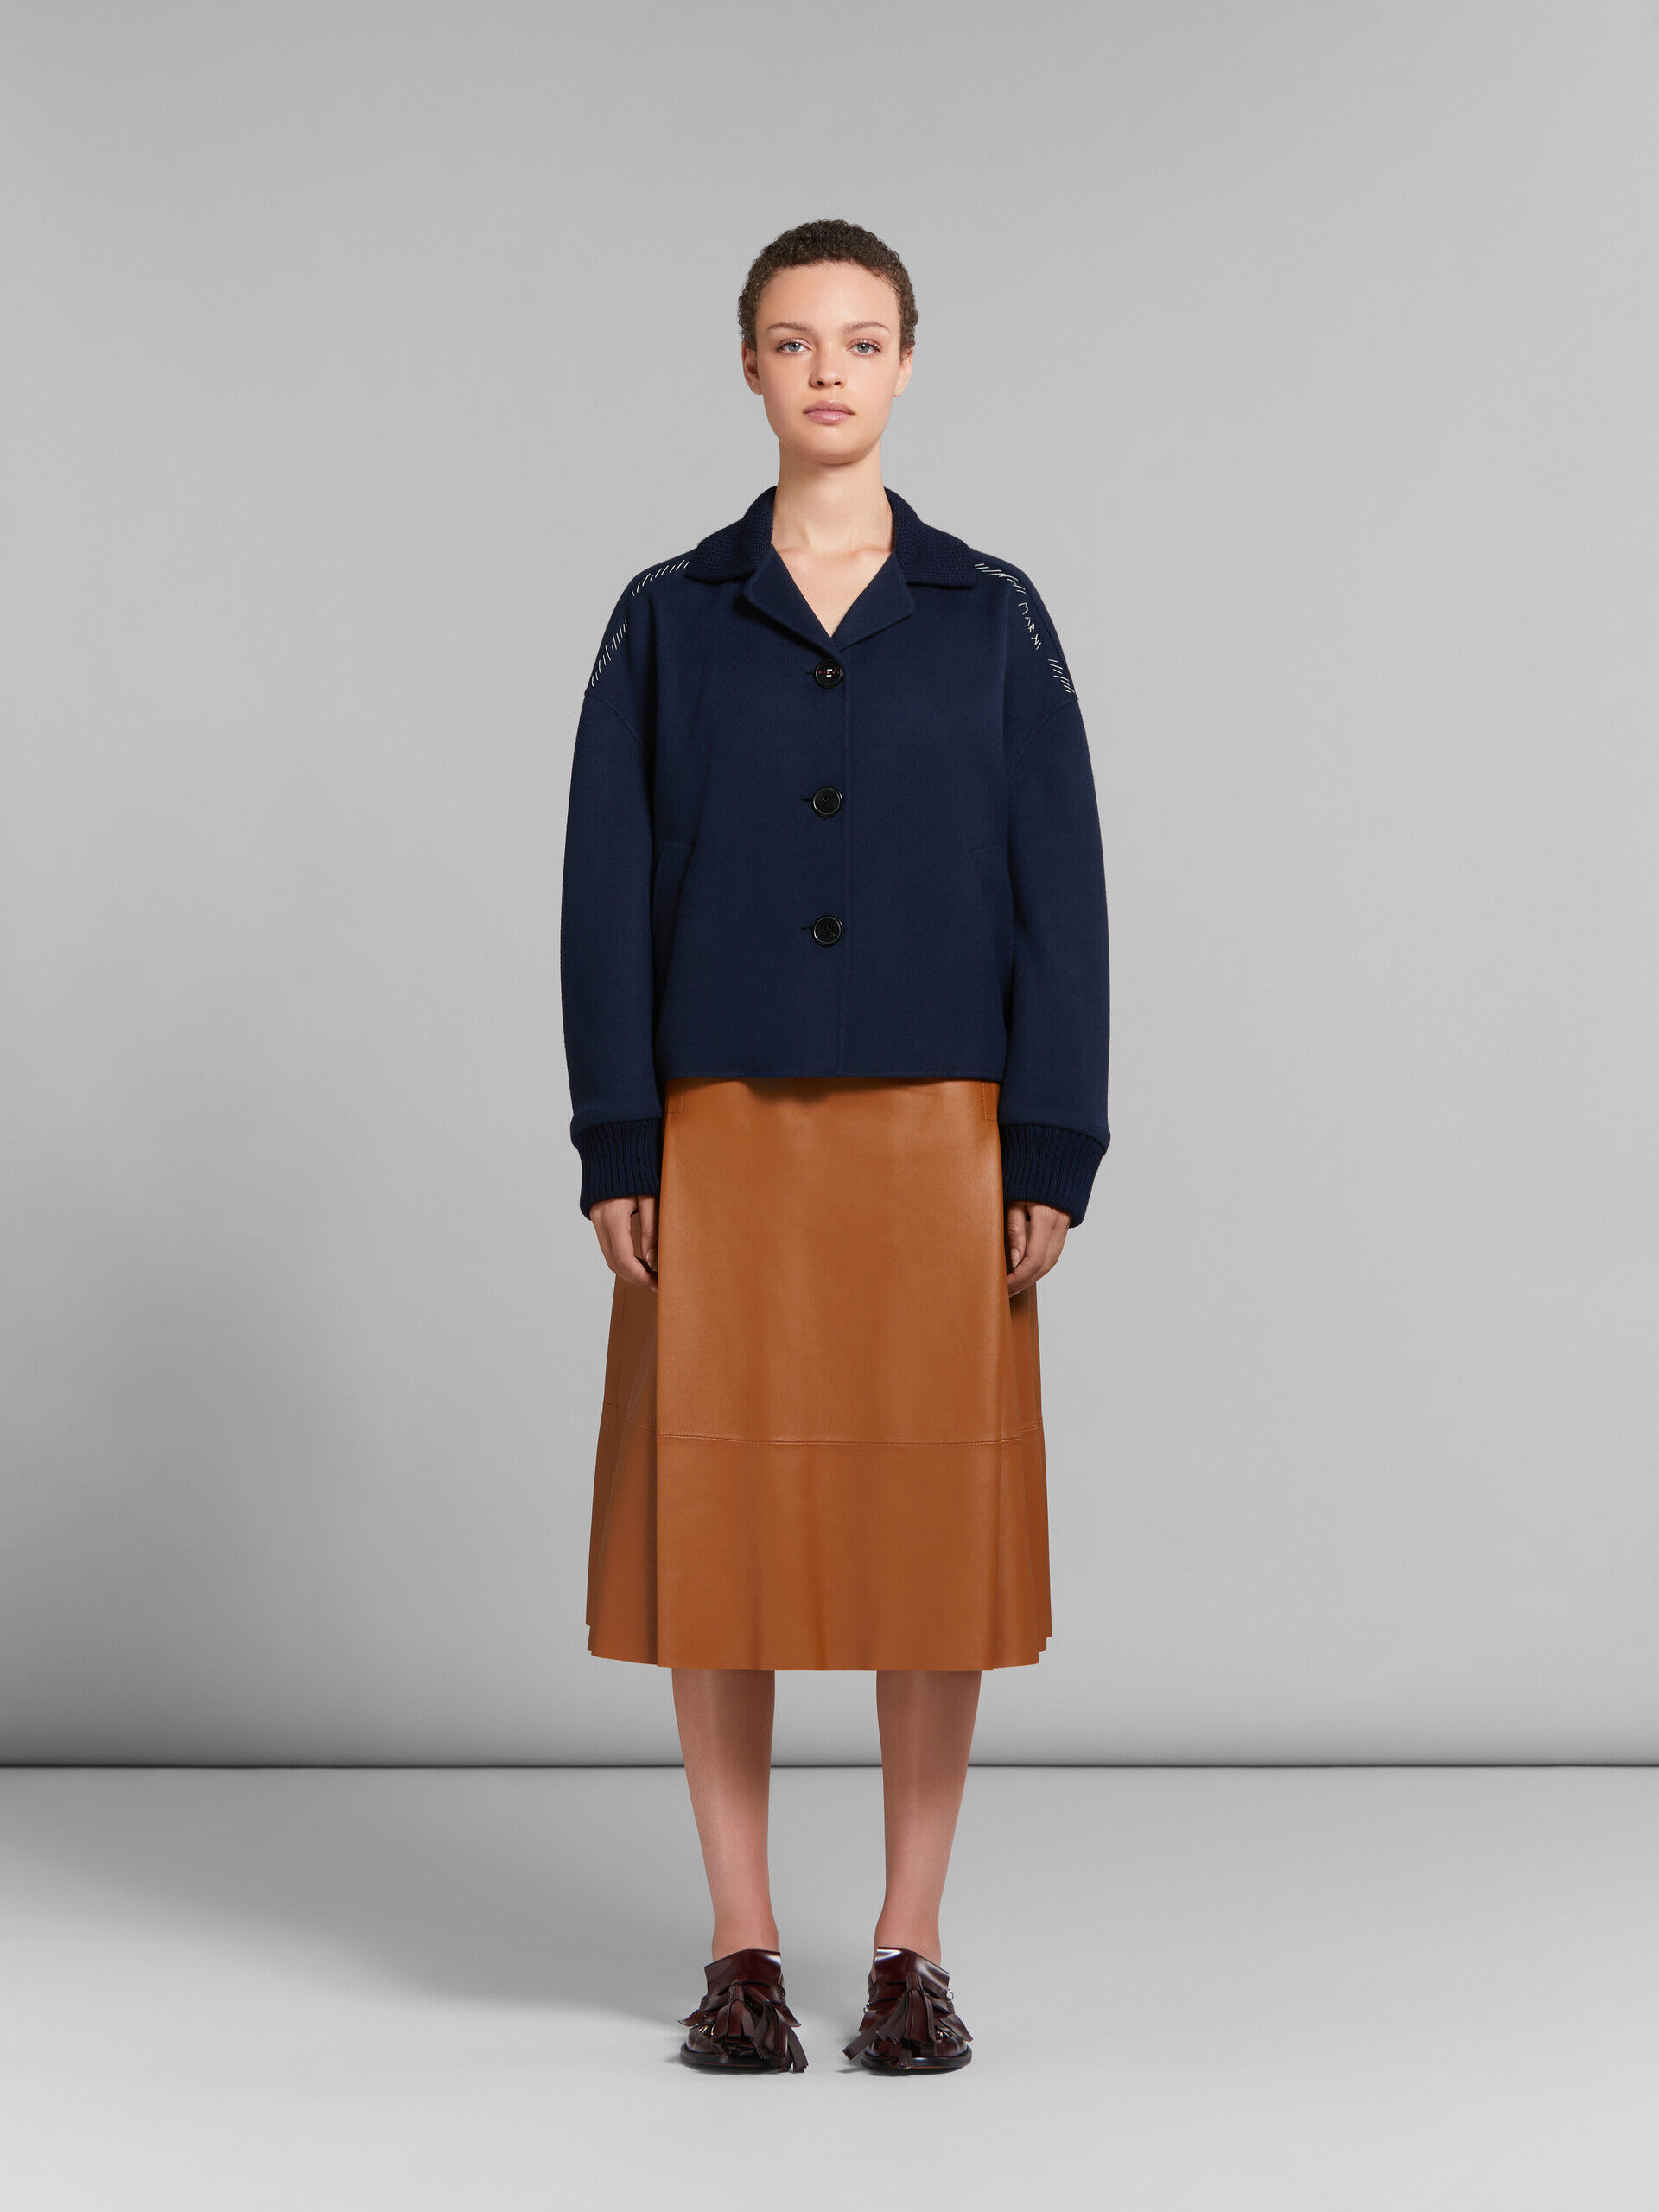 Deep blue wool and cashmere jacket with knit trims | Marni